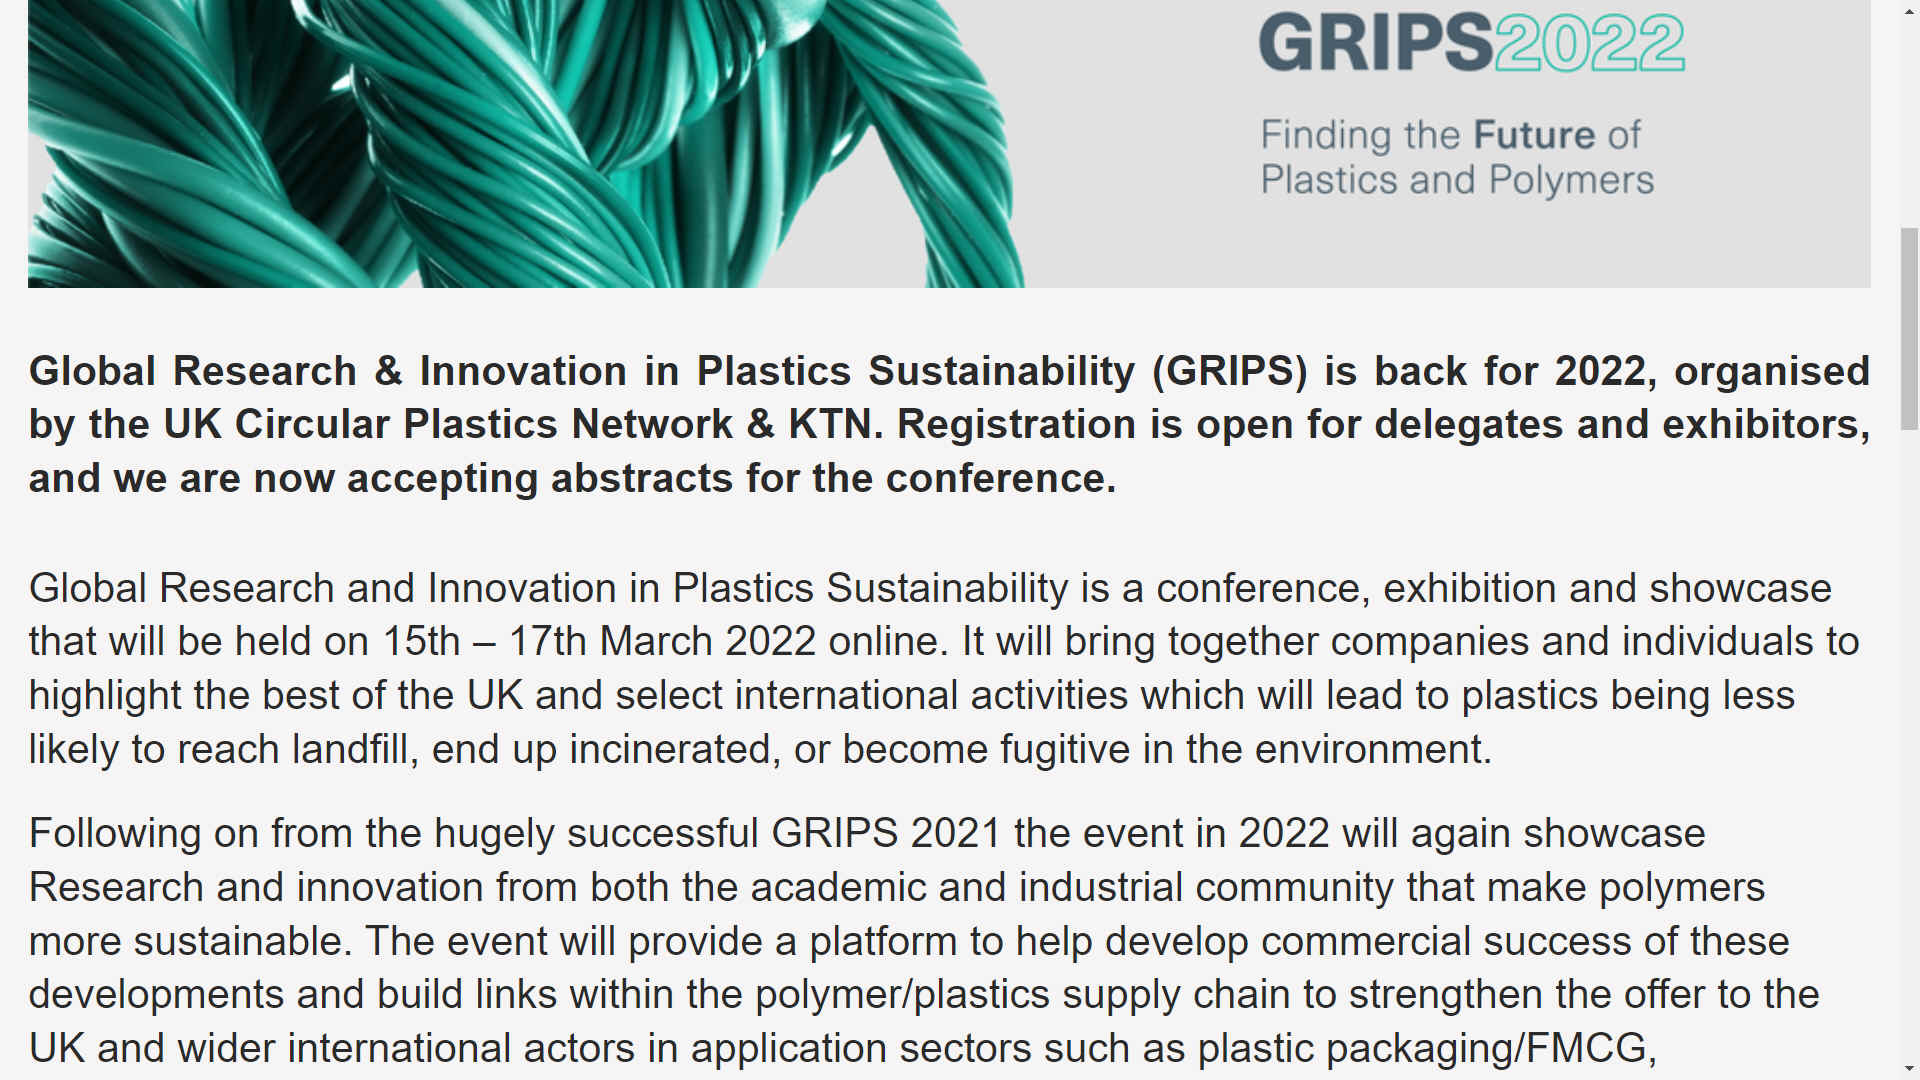 GRIPS - Sustainable plastic research and innovation15th March 2022